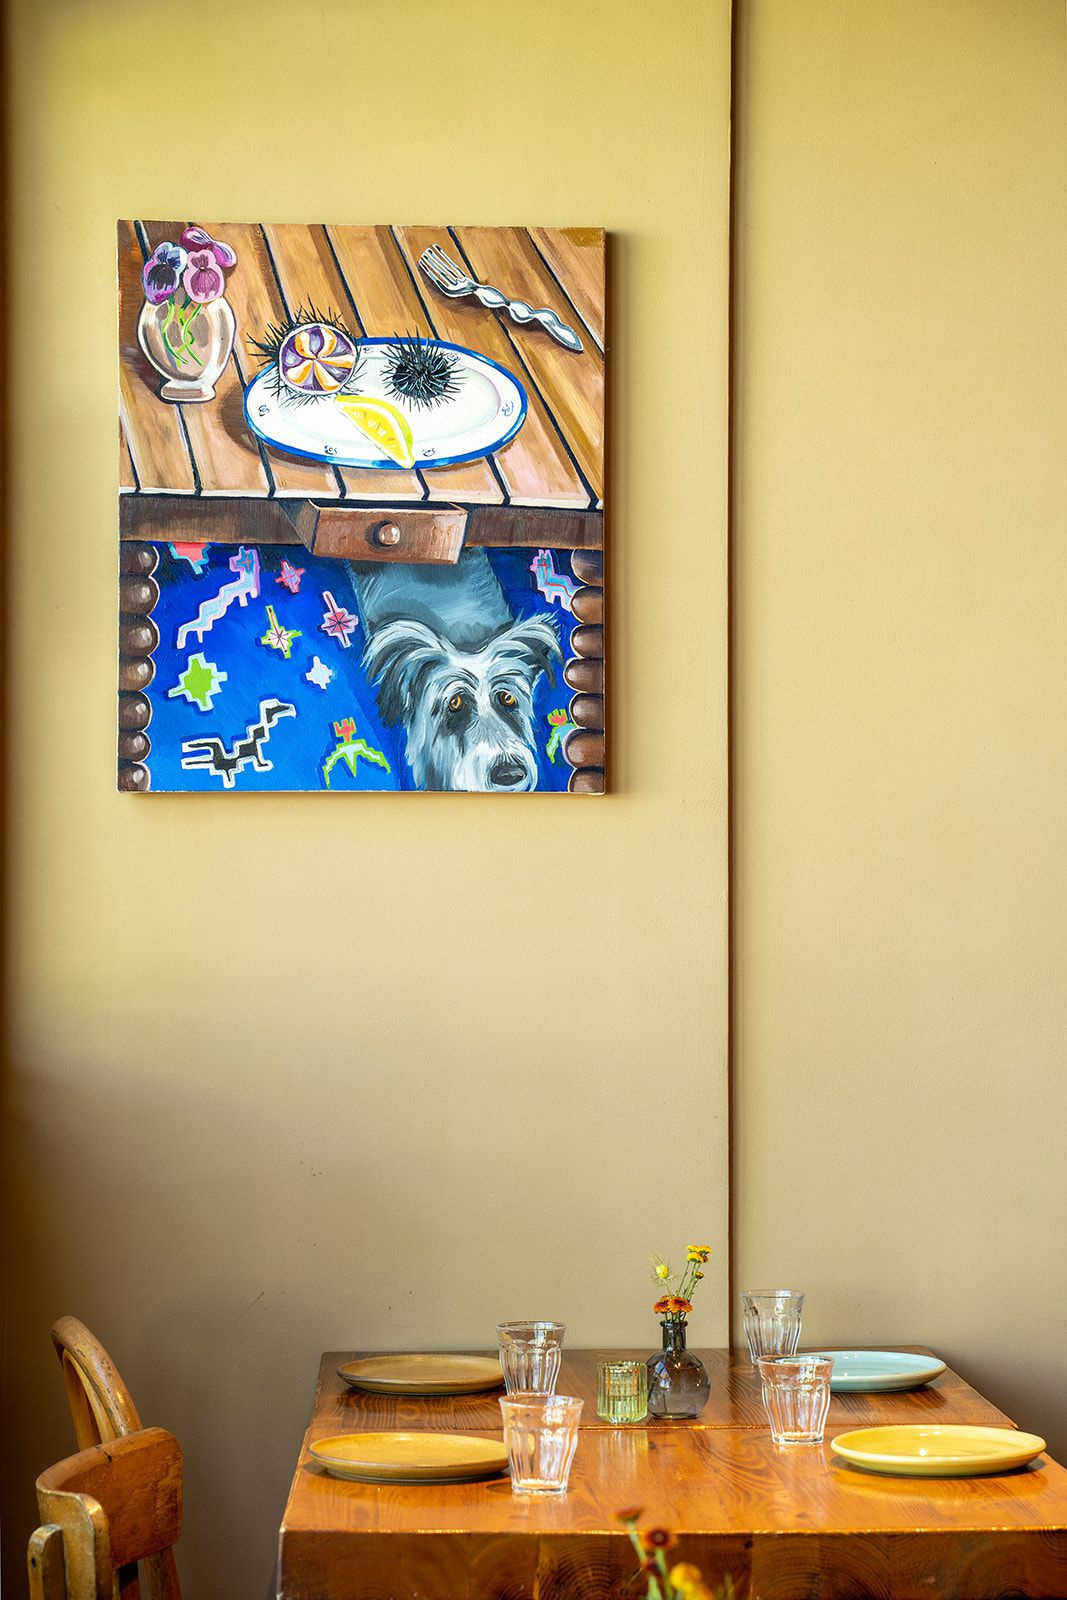 A painting of a dog in a restaurant.